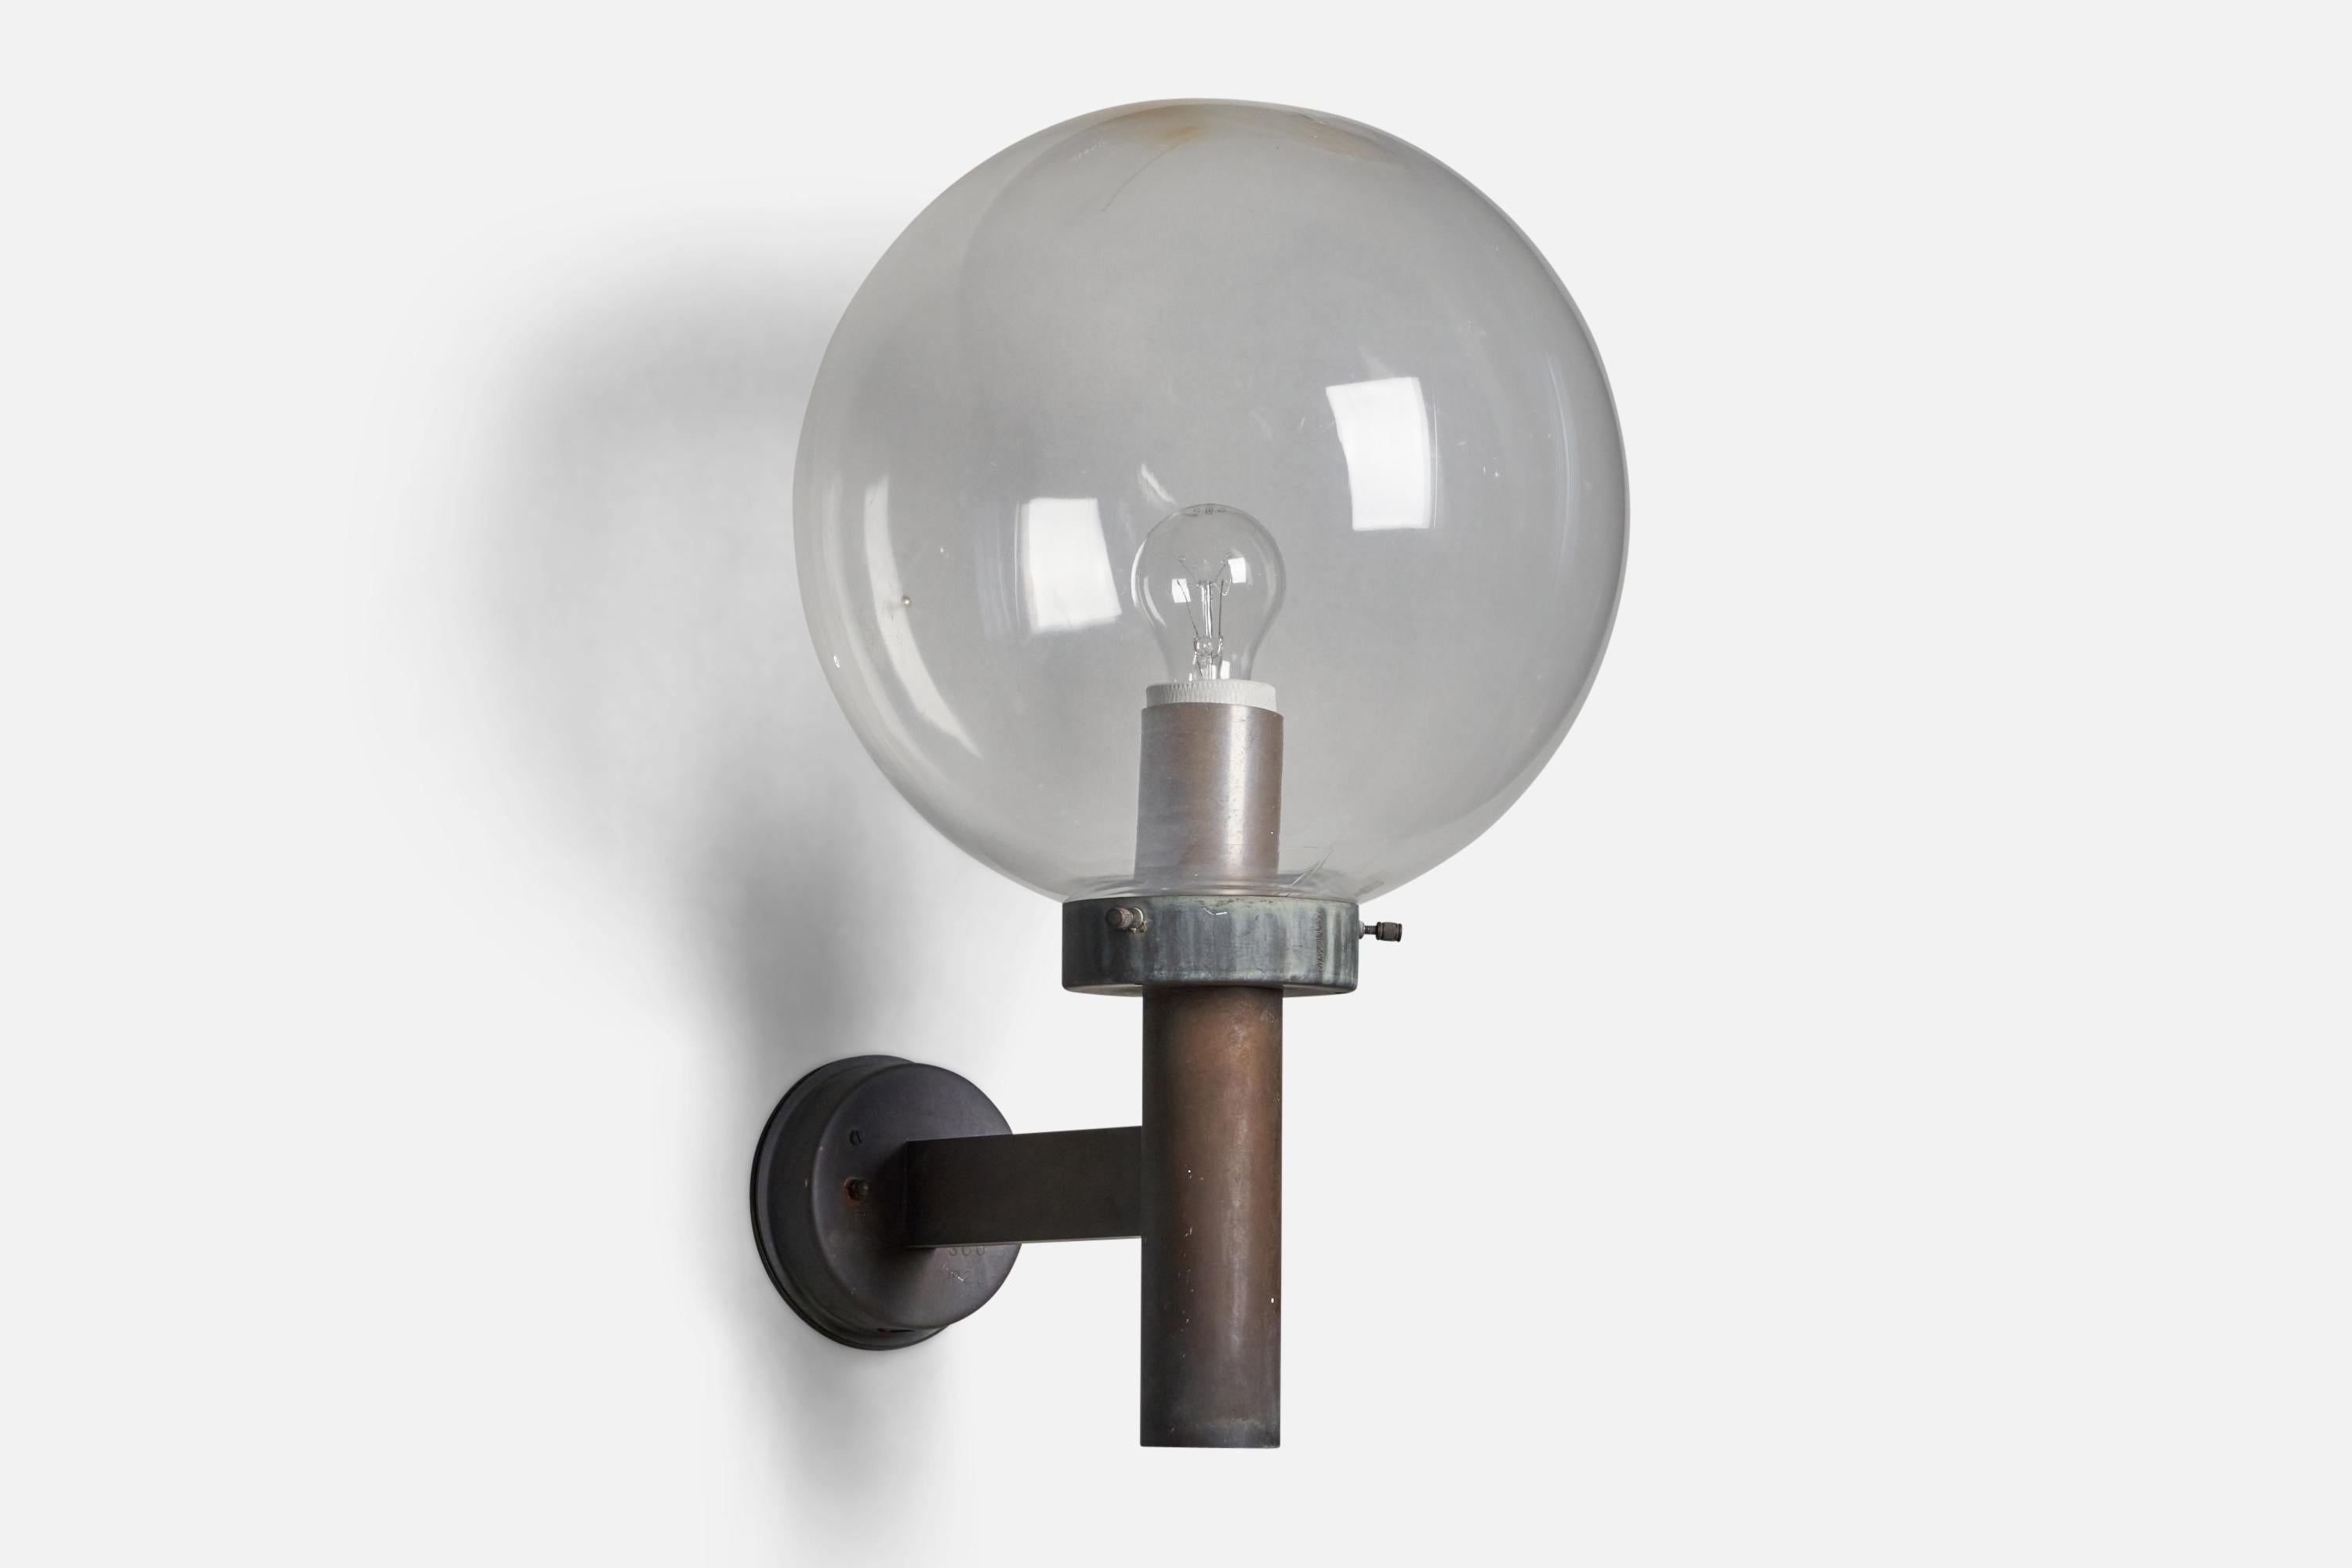 A sizeable copper and acrylic wall light designed and produced by Falkenbergs Belysning, Sweden, 1960s.

Overall Dimensions (inches): 20” H x 13” W x 14” D
Bulb Specifications: E-26 Bulb
Number of Sockets: 1